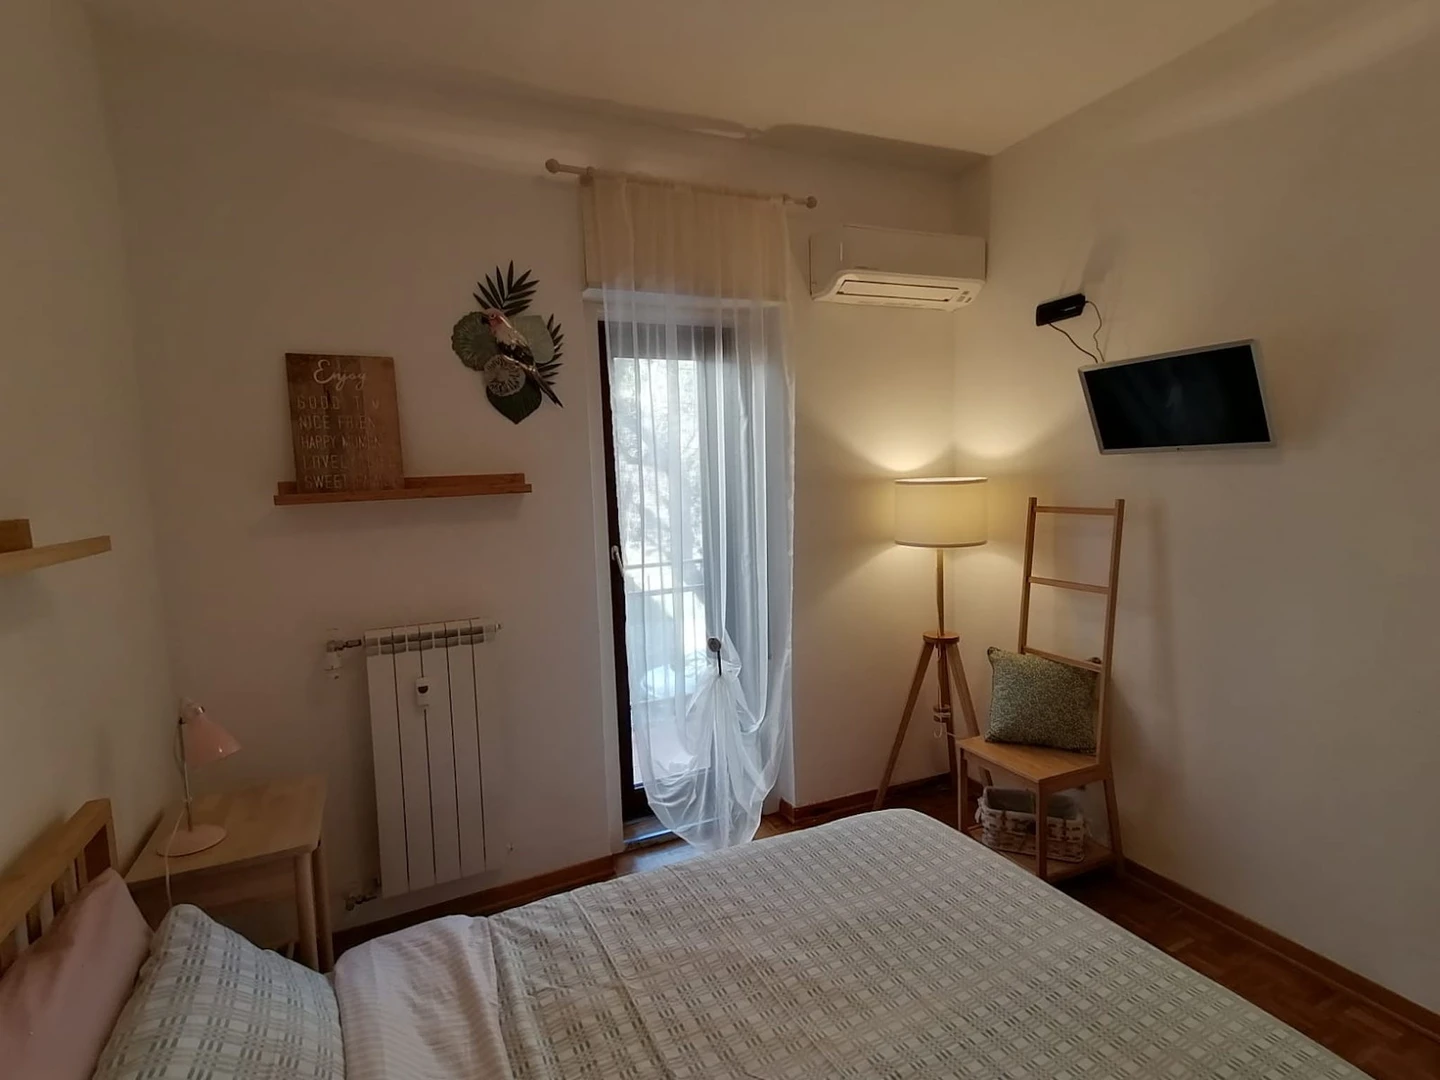 Accommodation in the centre of Trieste